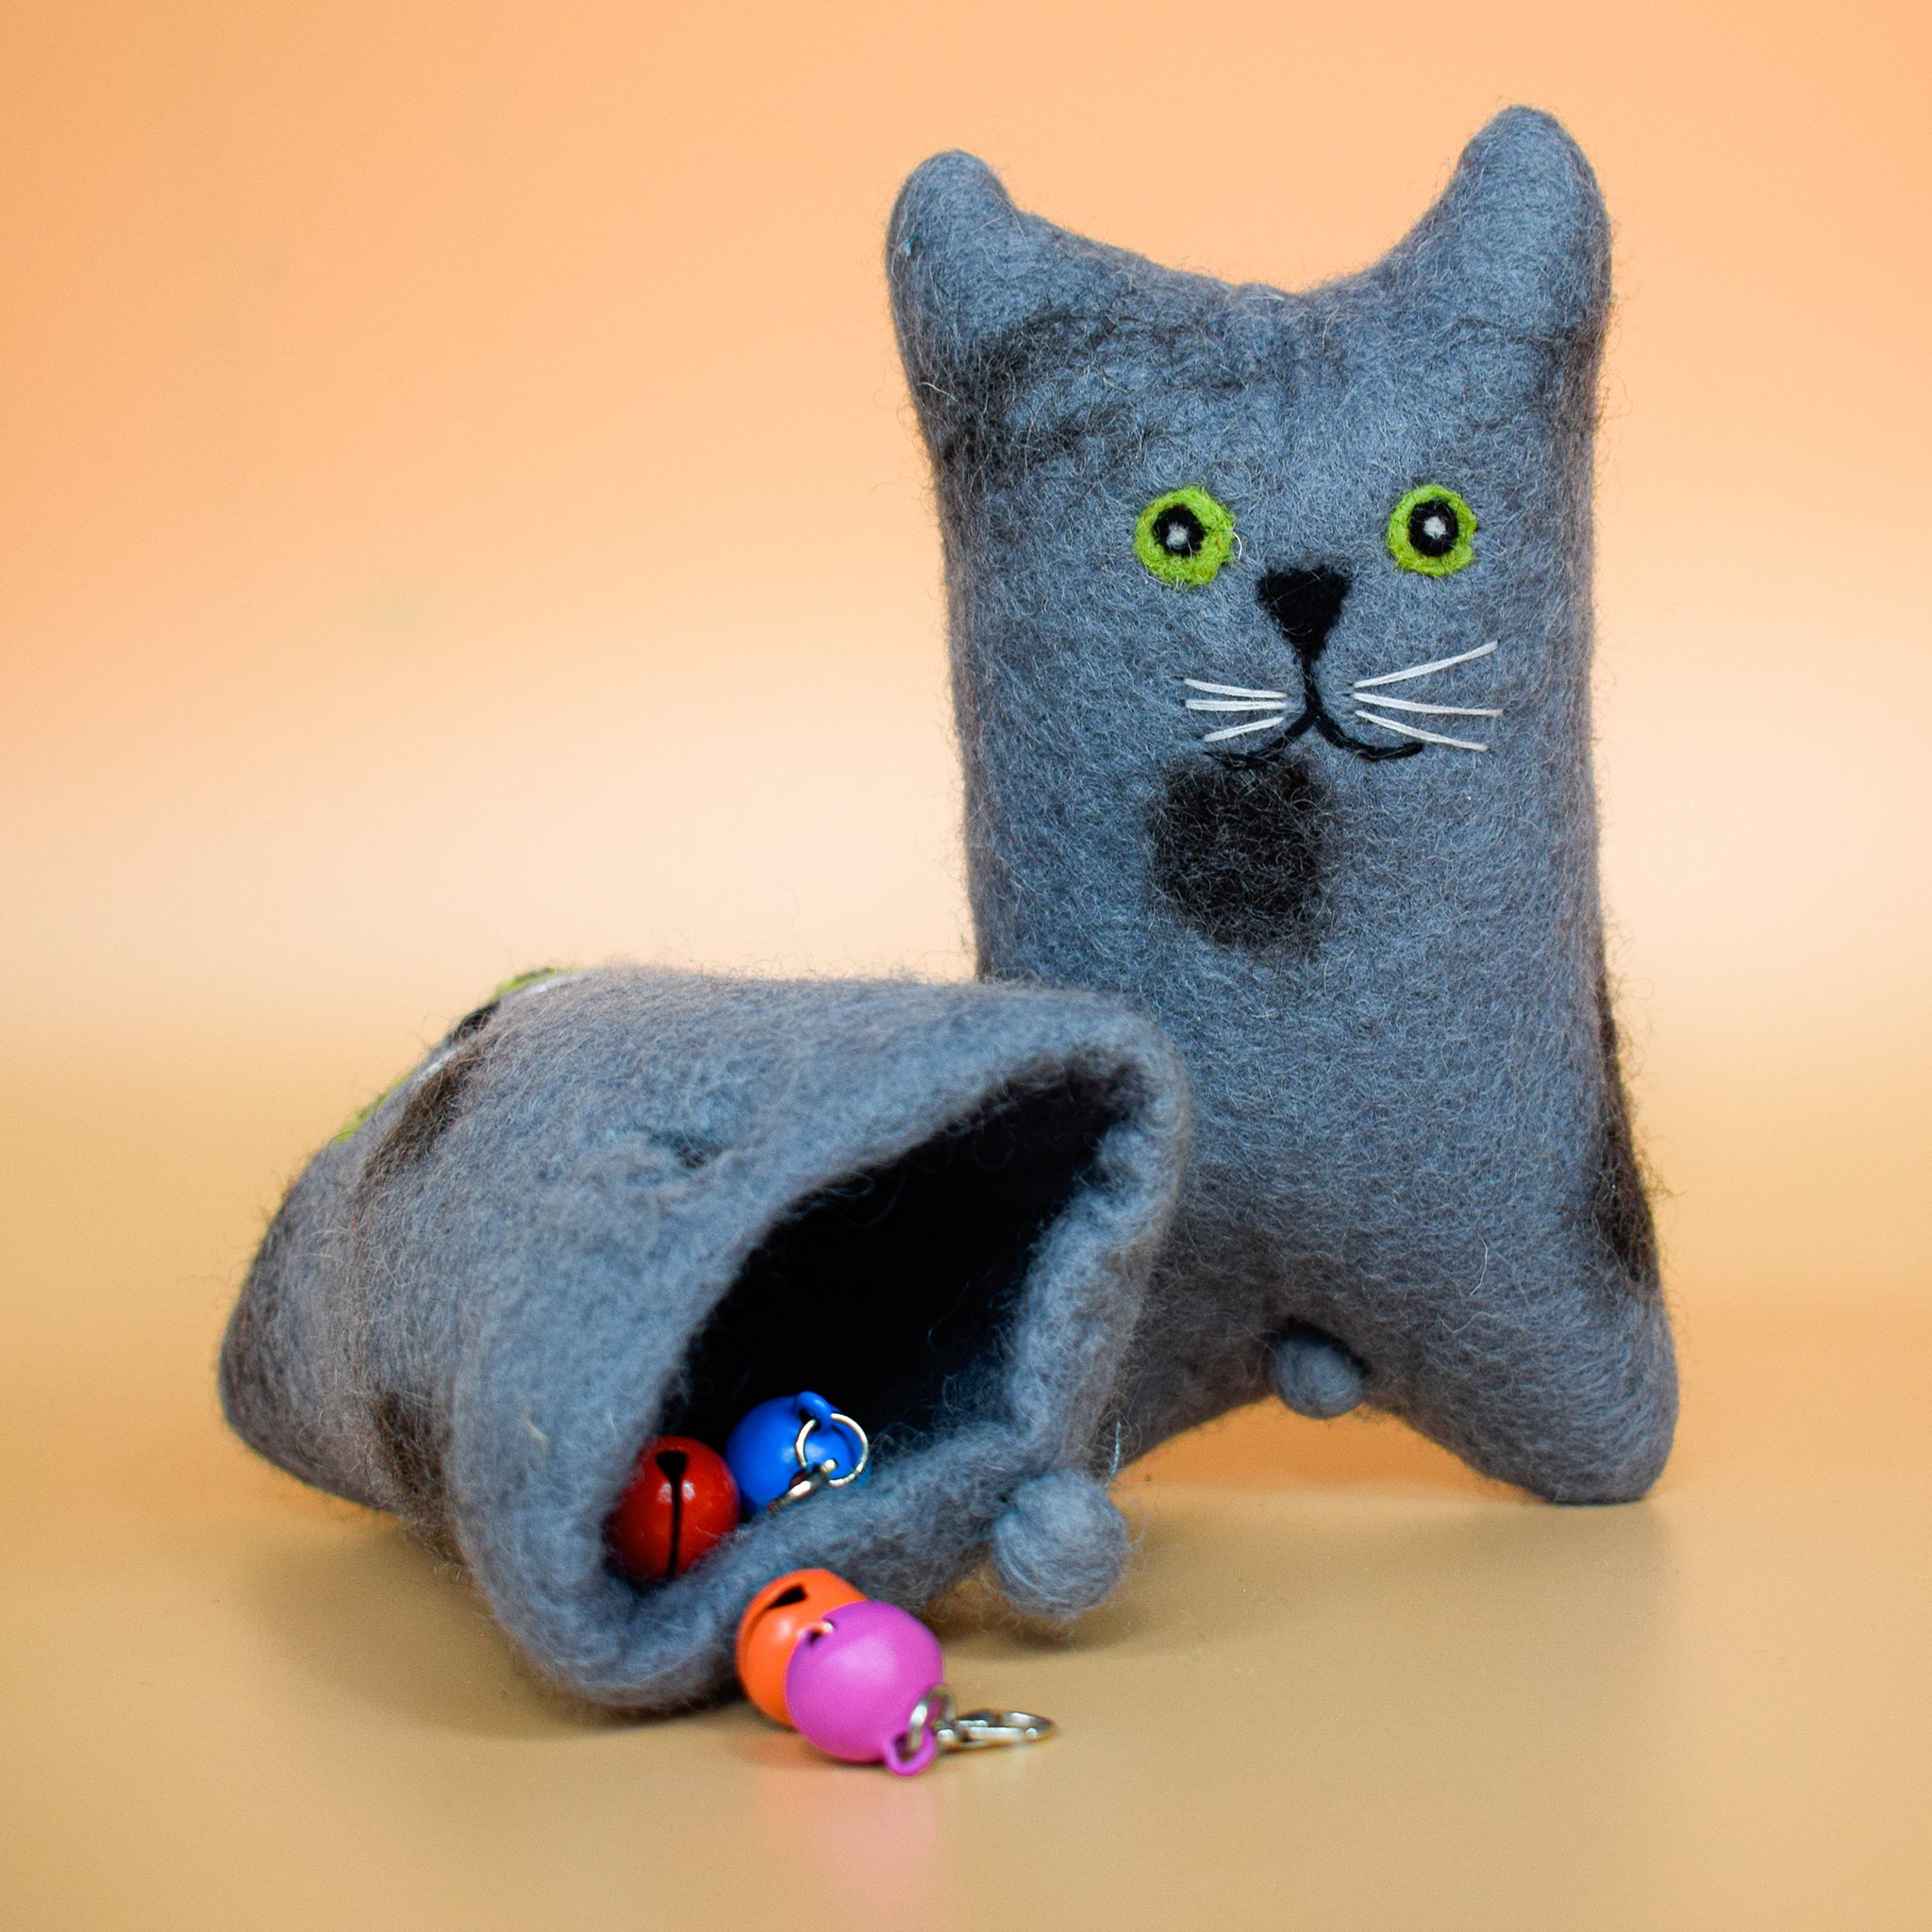 A blue hoomans friends felted wool natural cat toy placed on an orange background